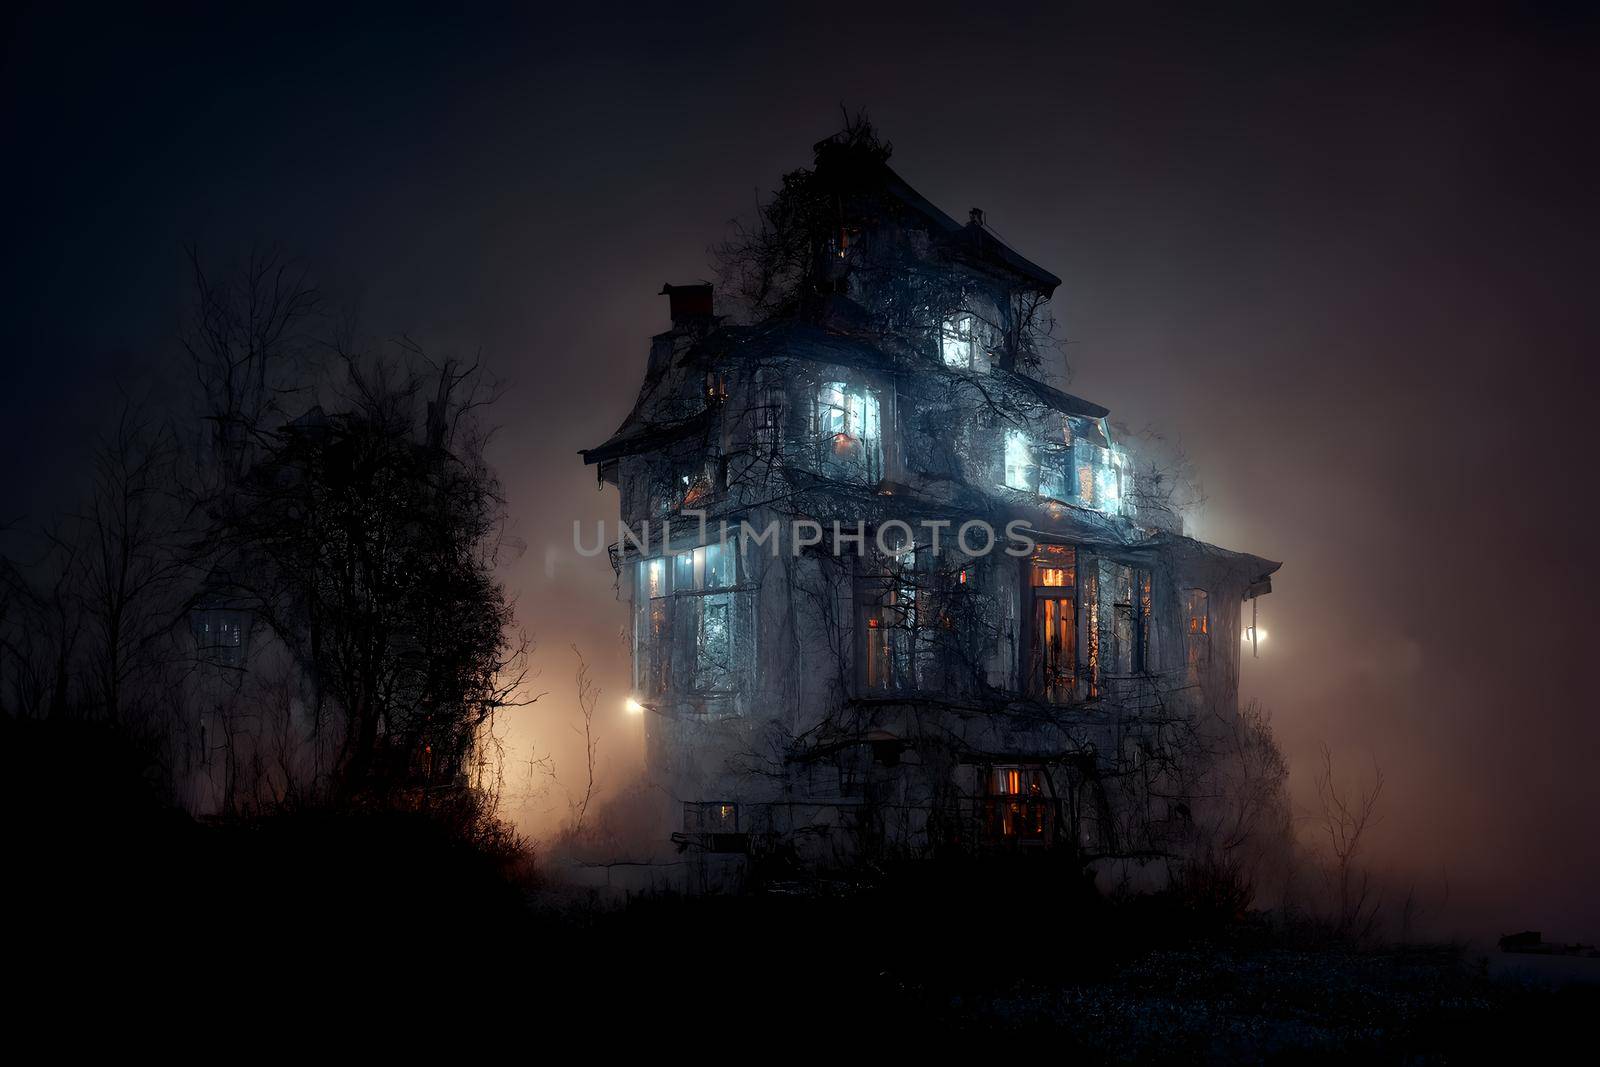 dark haunted house with illuminated windows at spooky misty dark halloween night, neural network generated art. Digitally generated image. Not based on any actual scene or pattern.